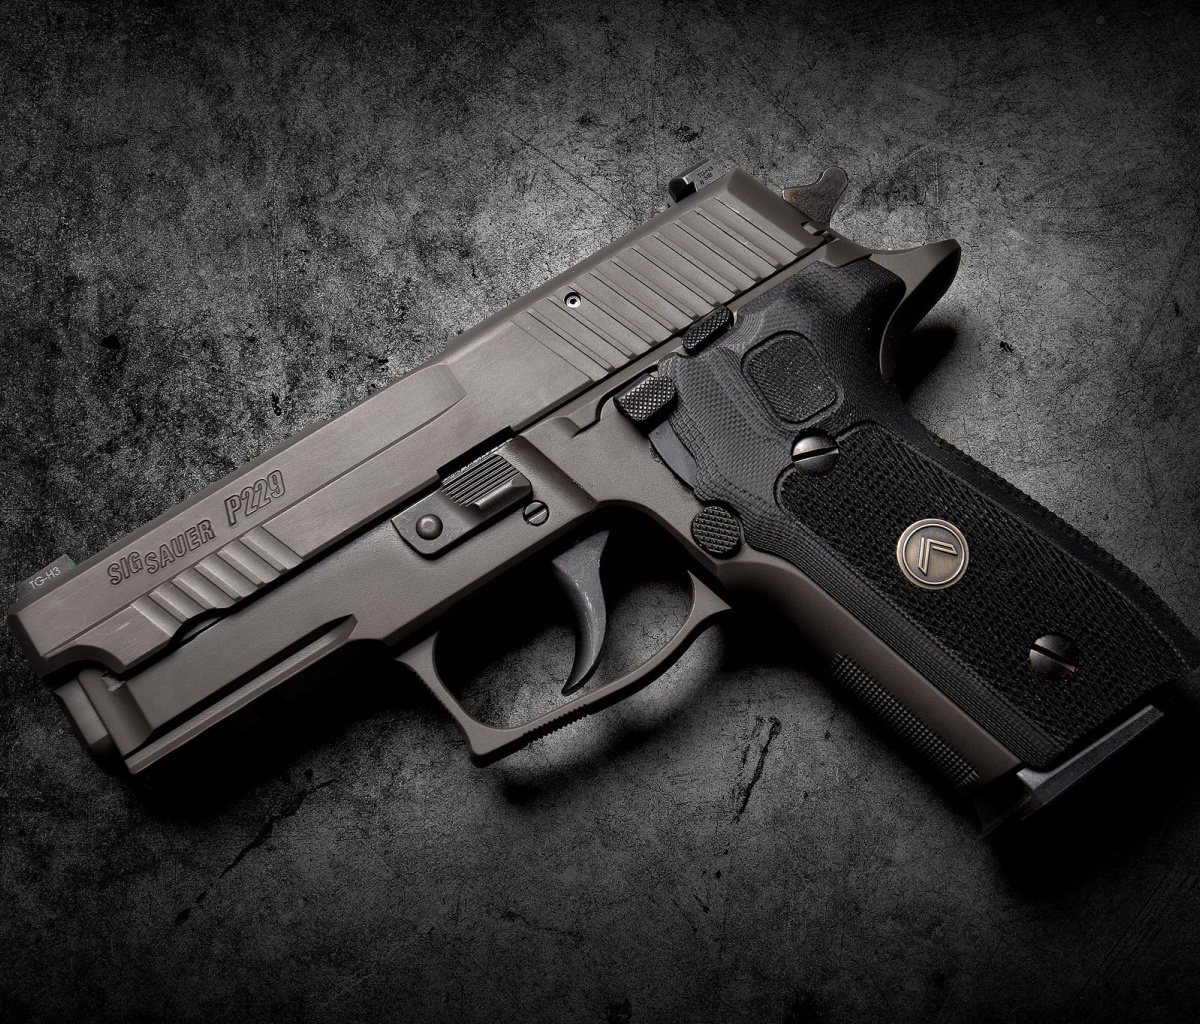 Sig Sauer Sigarms Pistols P229 wallpaper 1200x1024